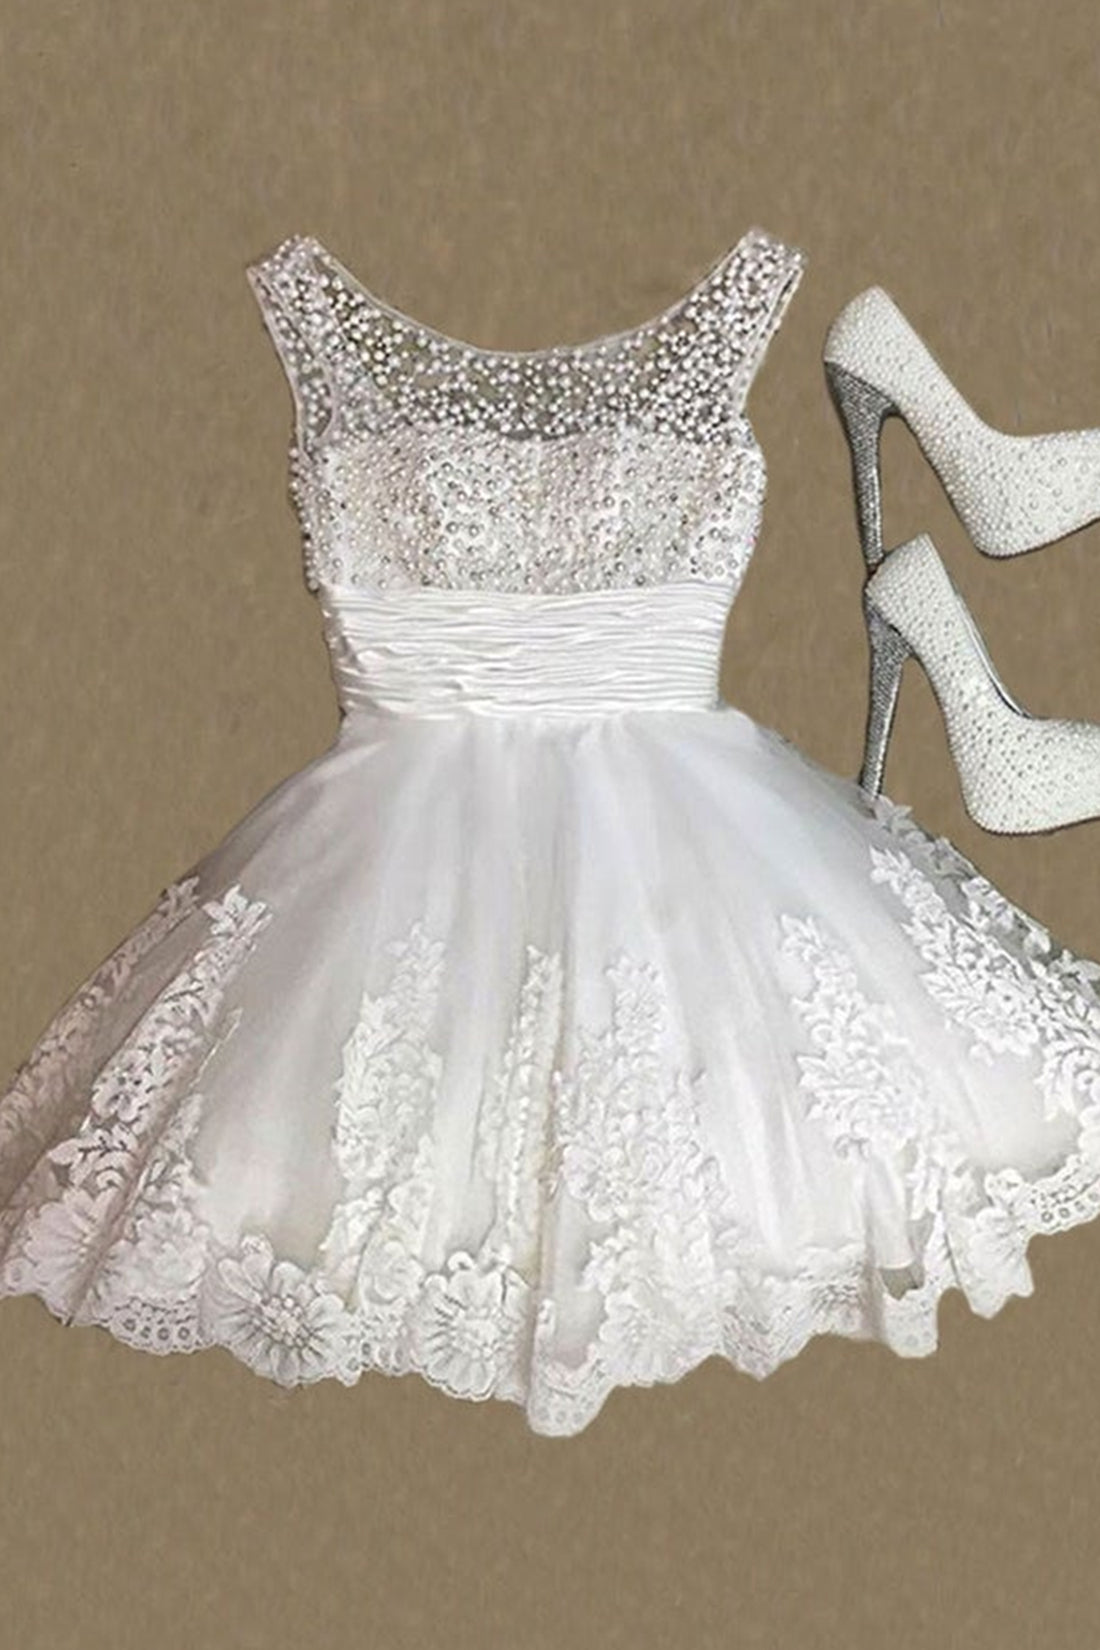 Round Neck Beaded White Lace Short Prom Homecoming Dresses, White Lace Formal Dresses with Pearls, White Evening Dresses